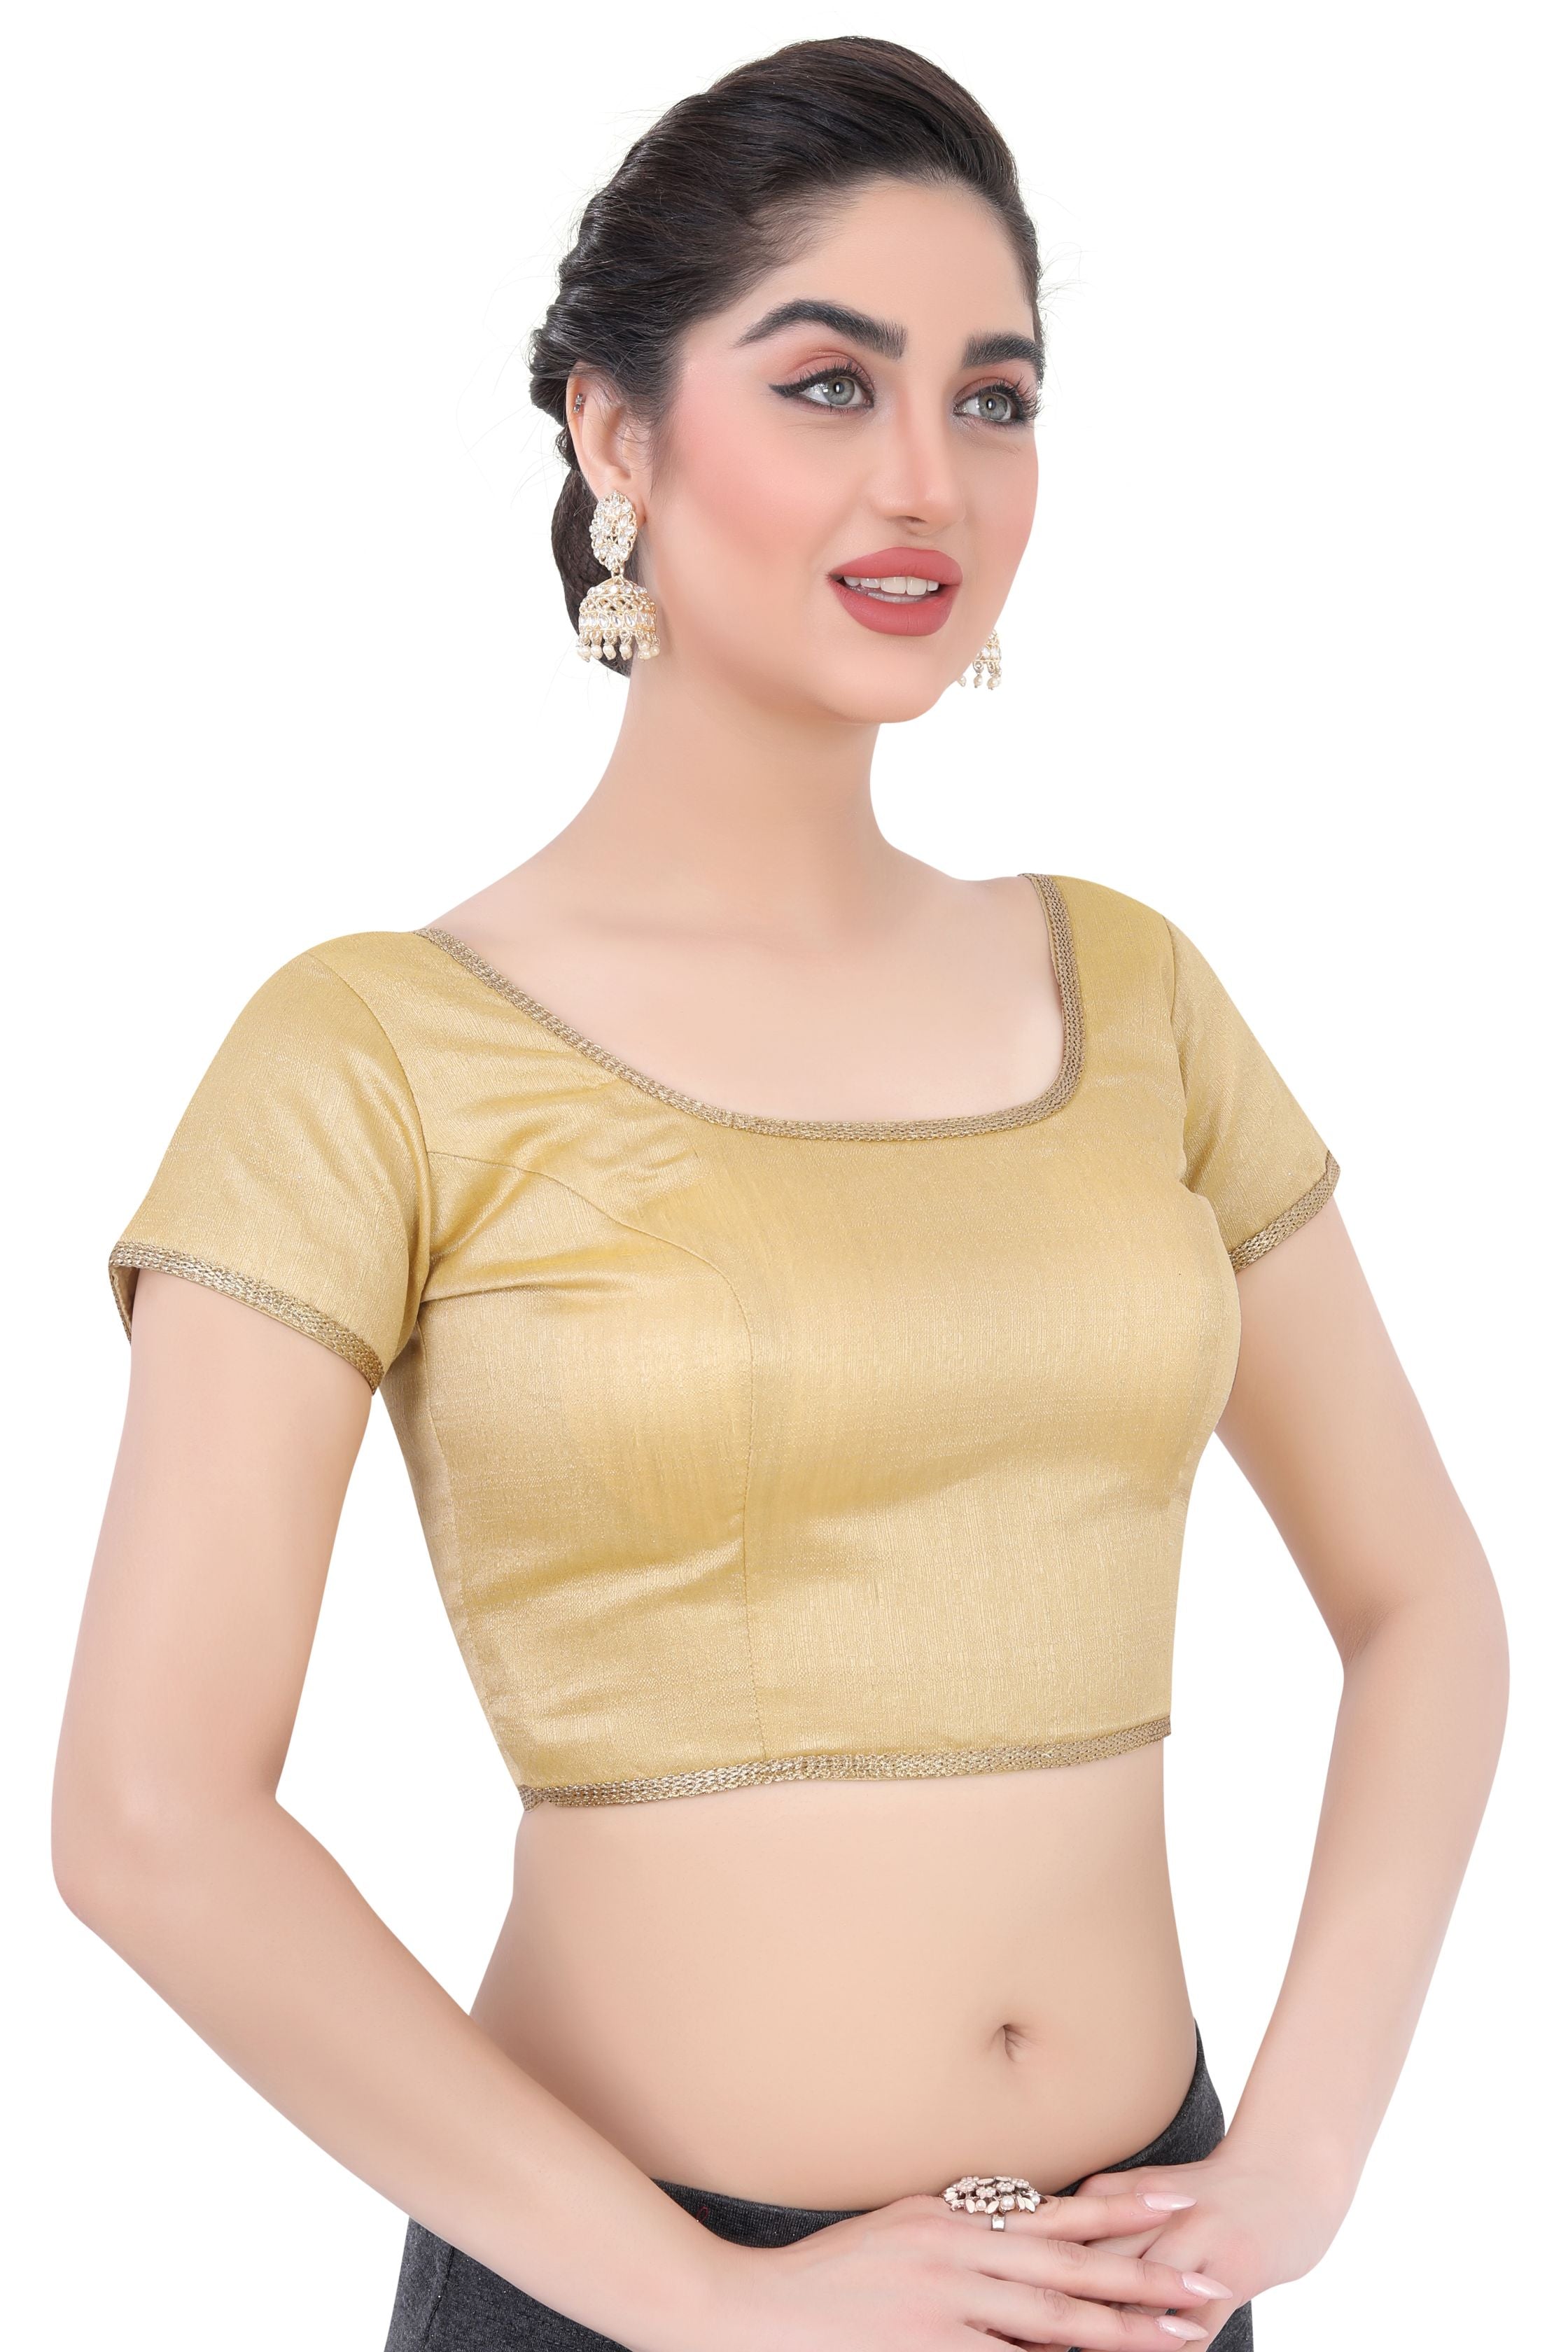 Short Sleeve Women's Bangalori satin/Brocade Blouses for partywear sarees in Gold BSB/11